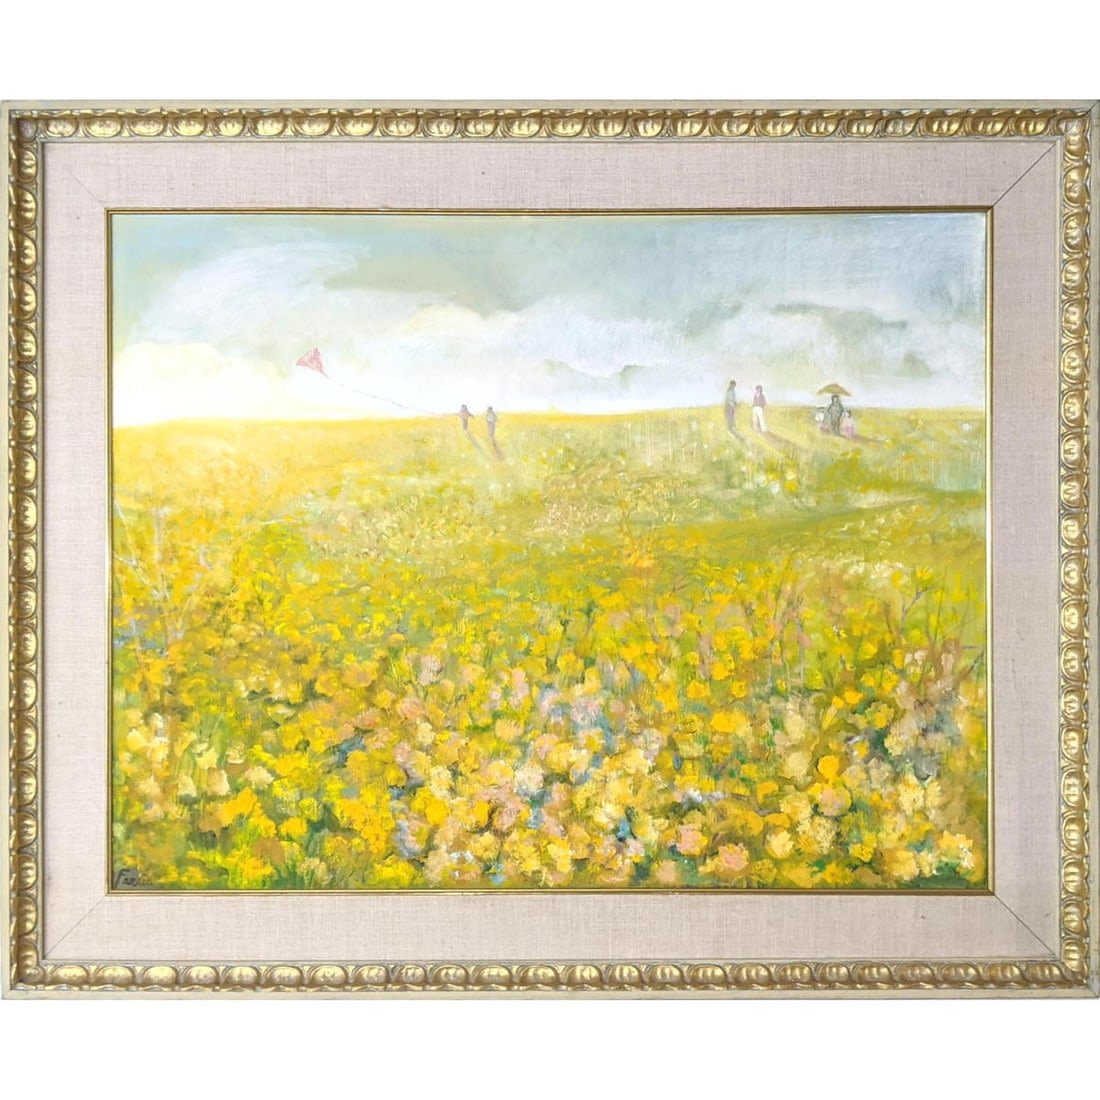 FARRIS Flower Field Painting Sweet 3ad7a2